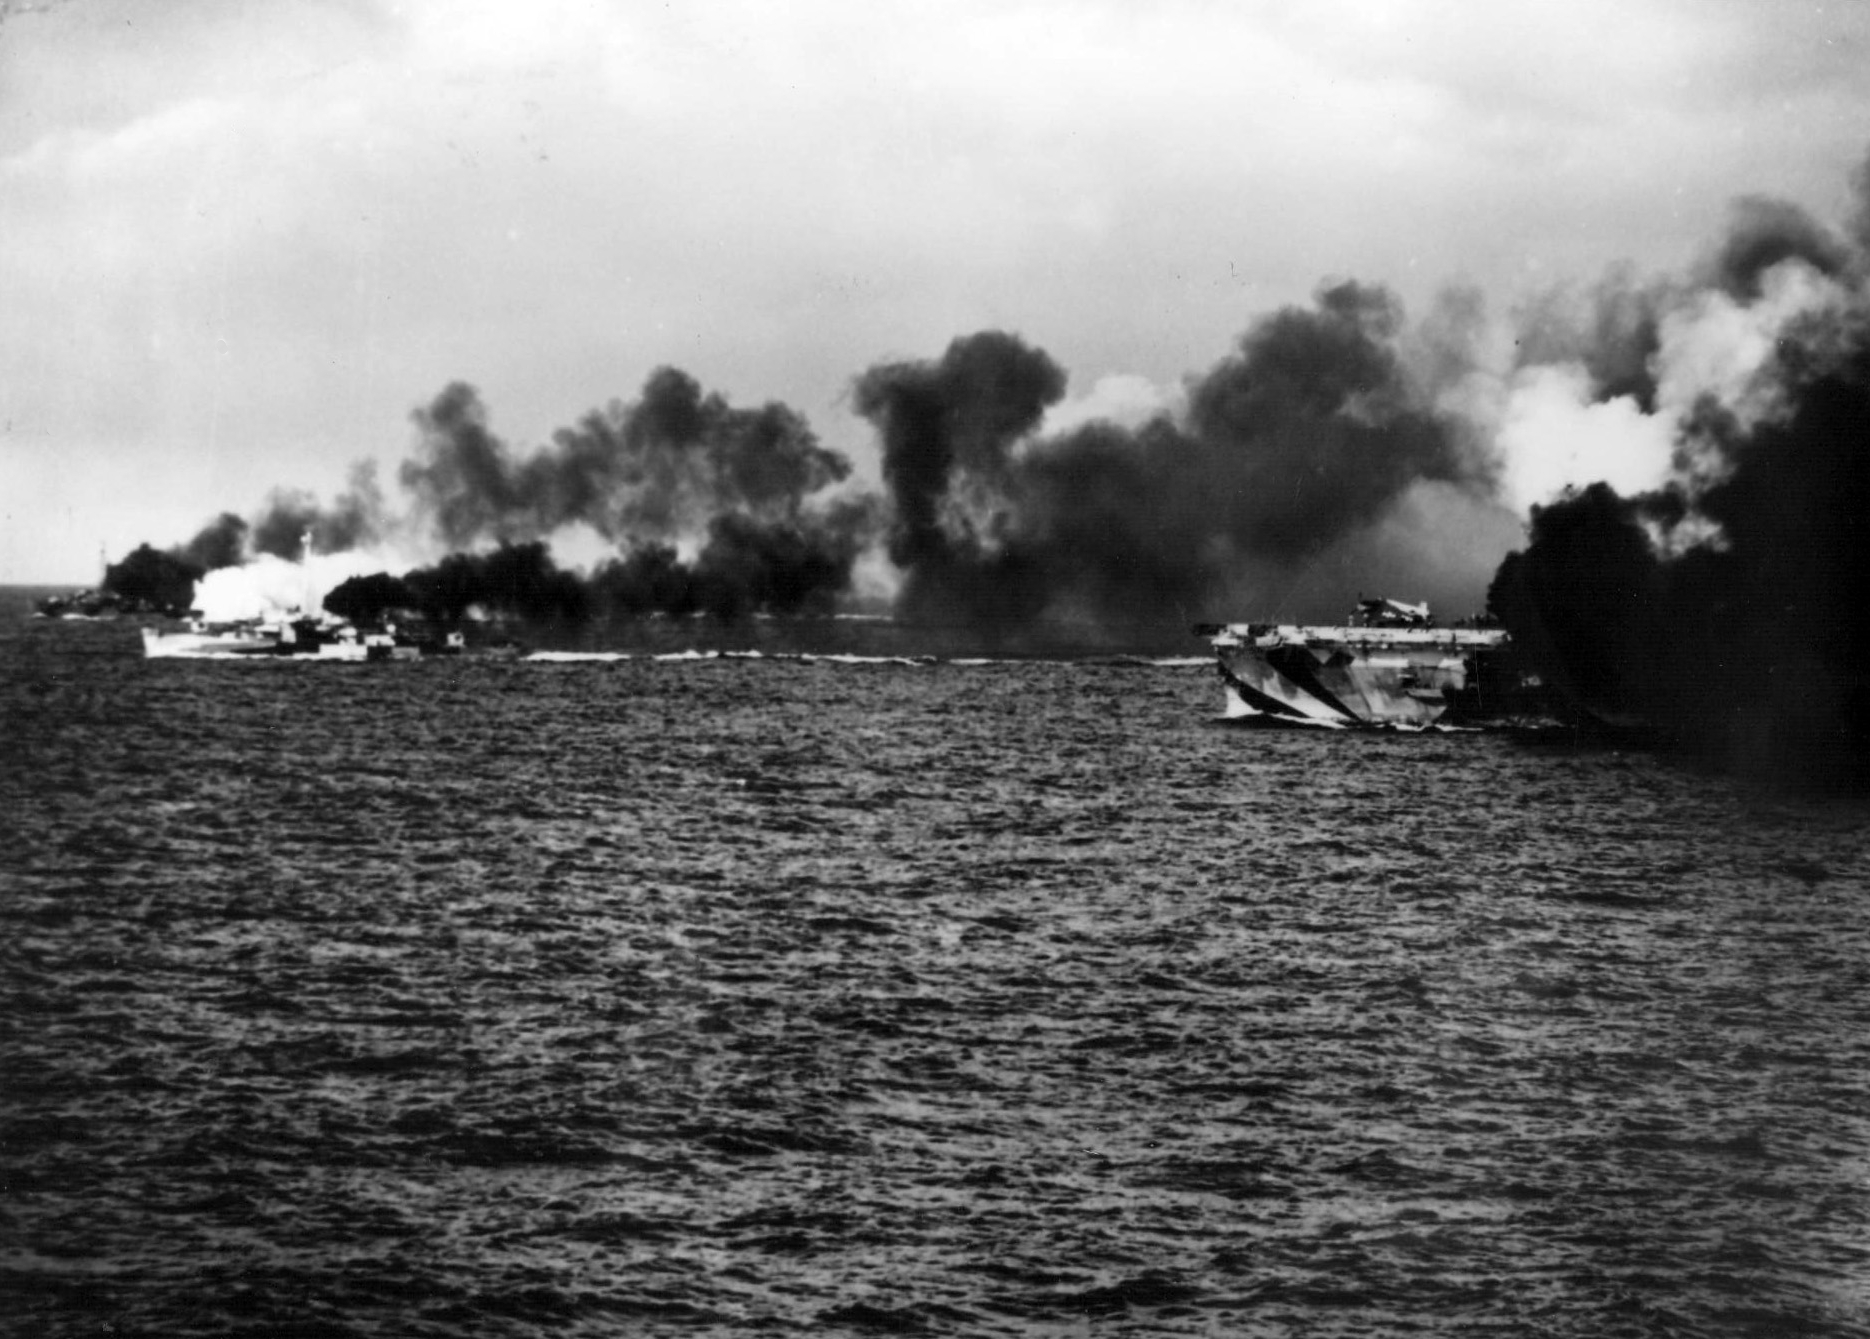 Escort Carrier USS Gambier Bay, Destroyer Escort USS Raymond, and another Destroyer Escort, elements of Taffy 3, laying smoke before engaging the Japanese Center Force in the Battle Off Samar, Oct 25, 1944.